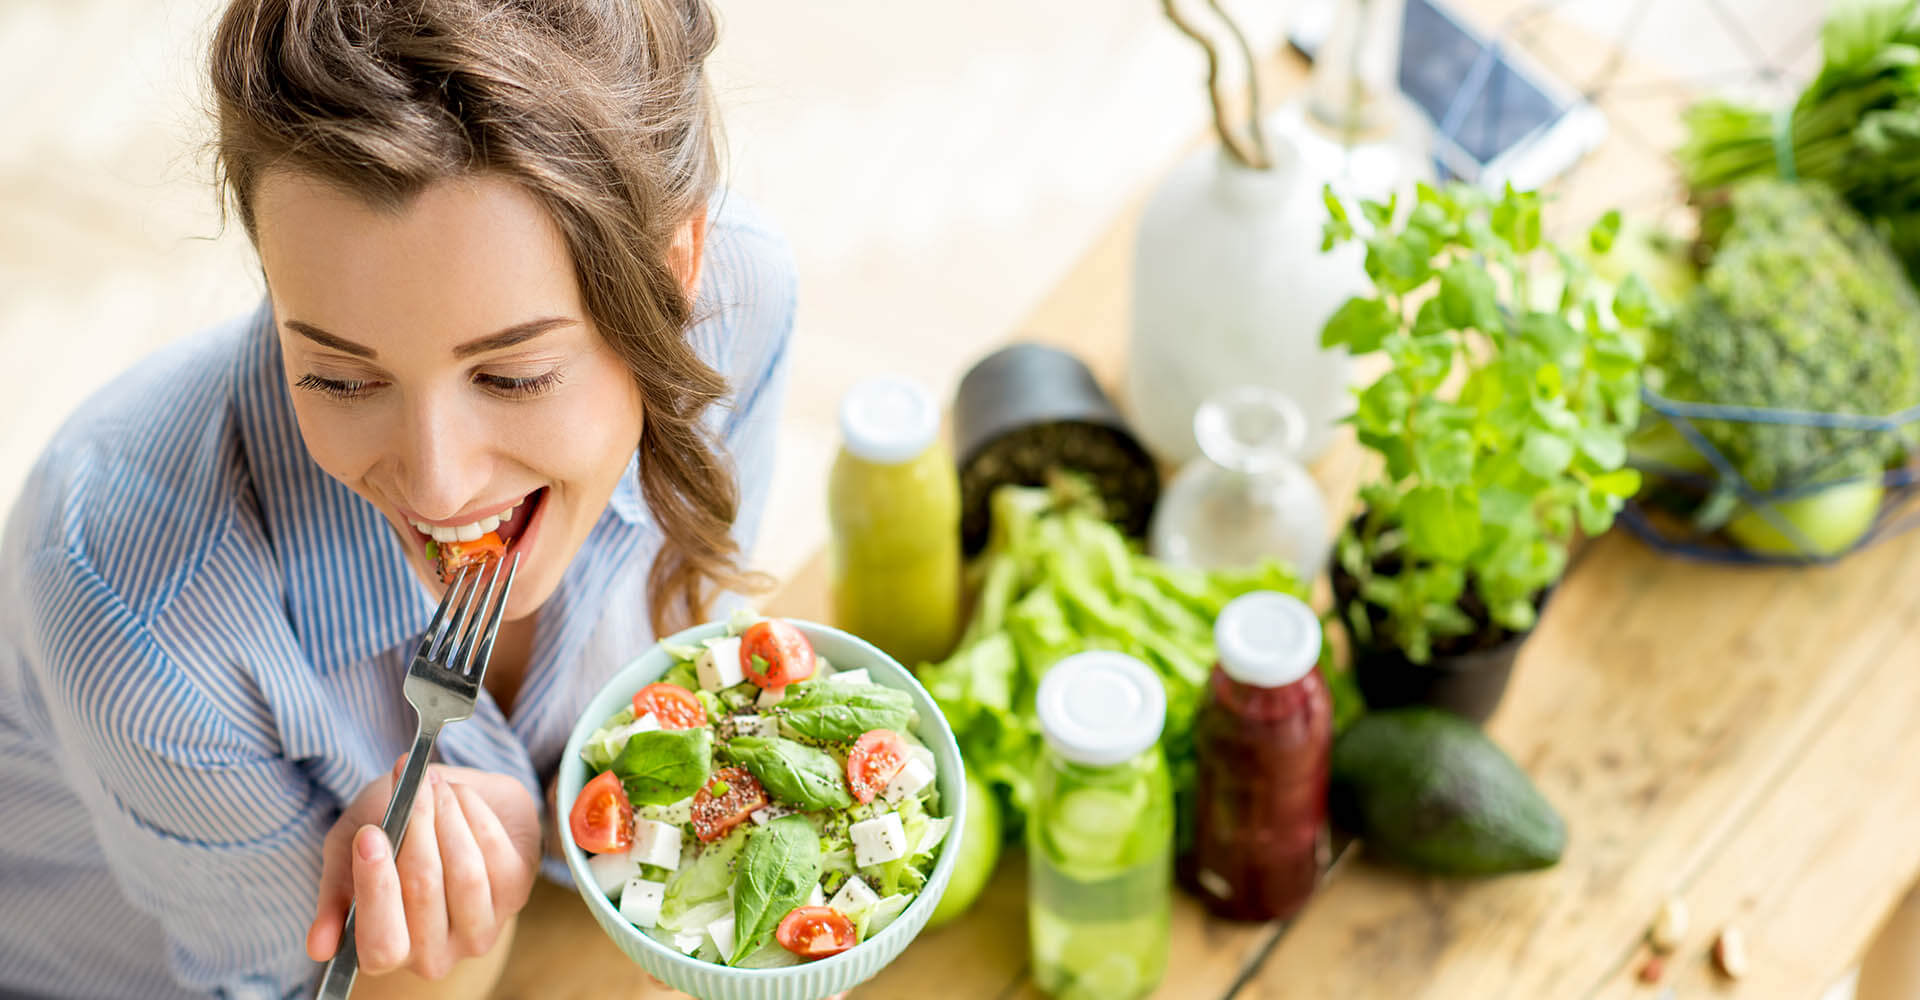 Woman eats a bowl of salad that she apparently prepared for herself